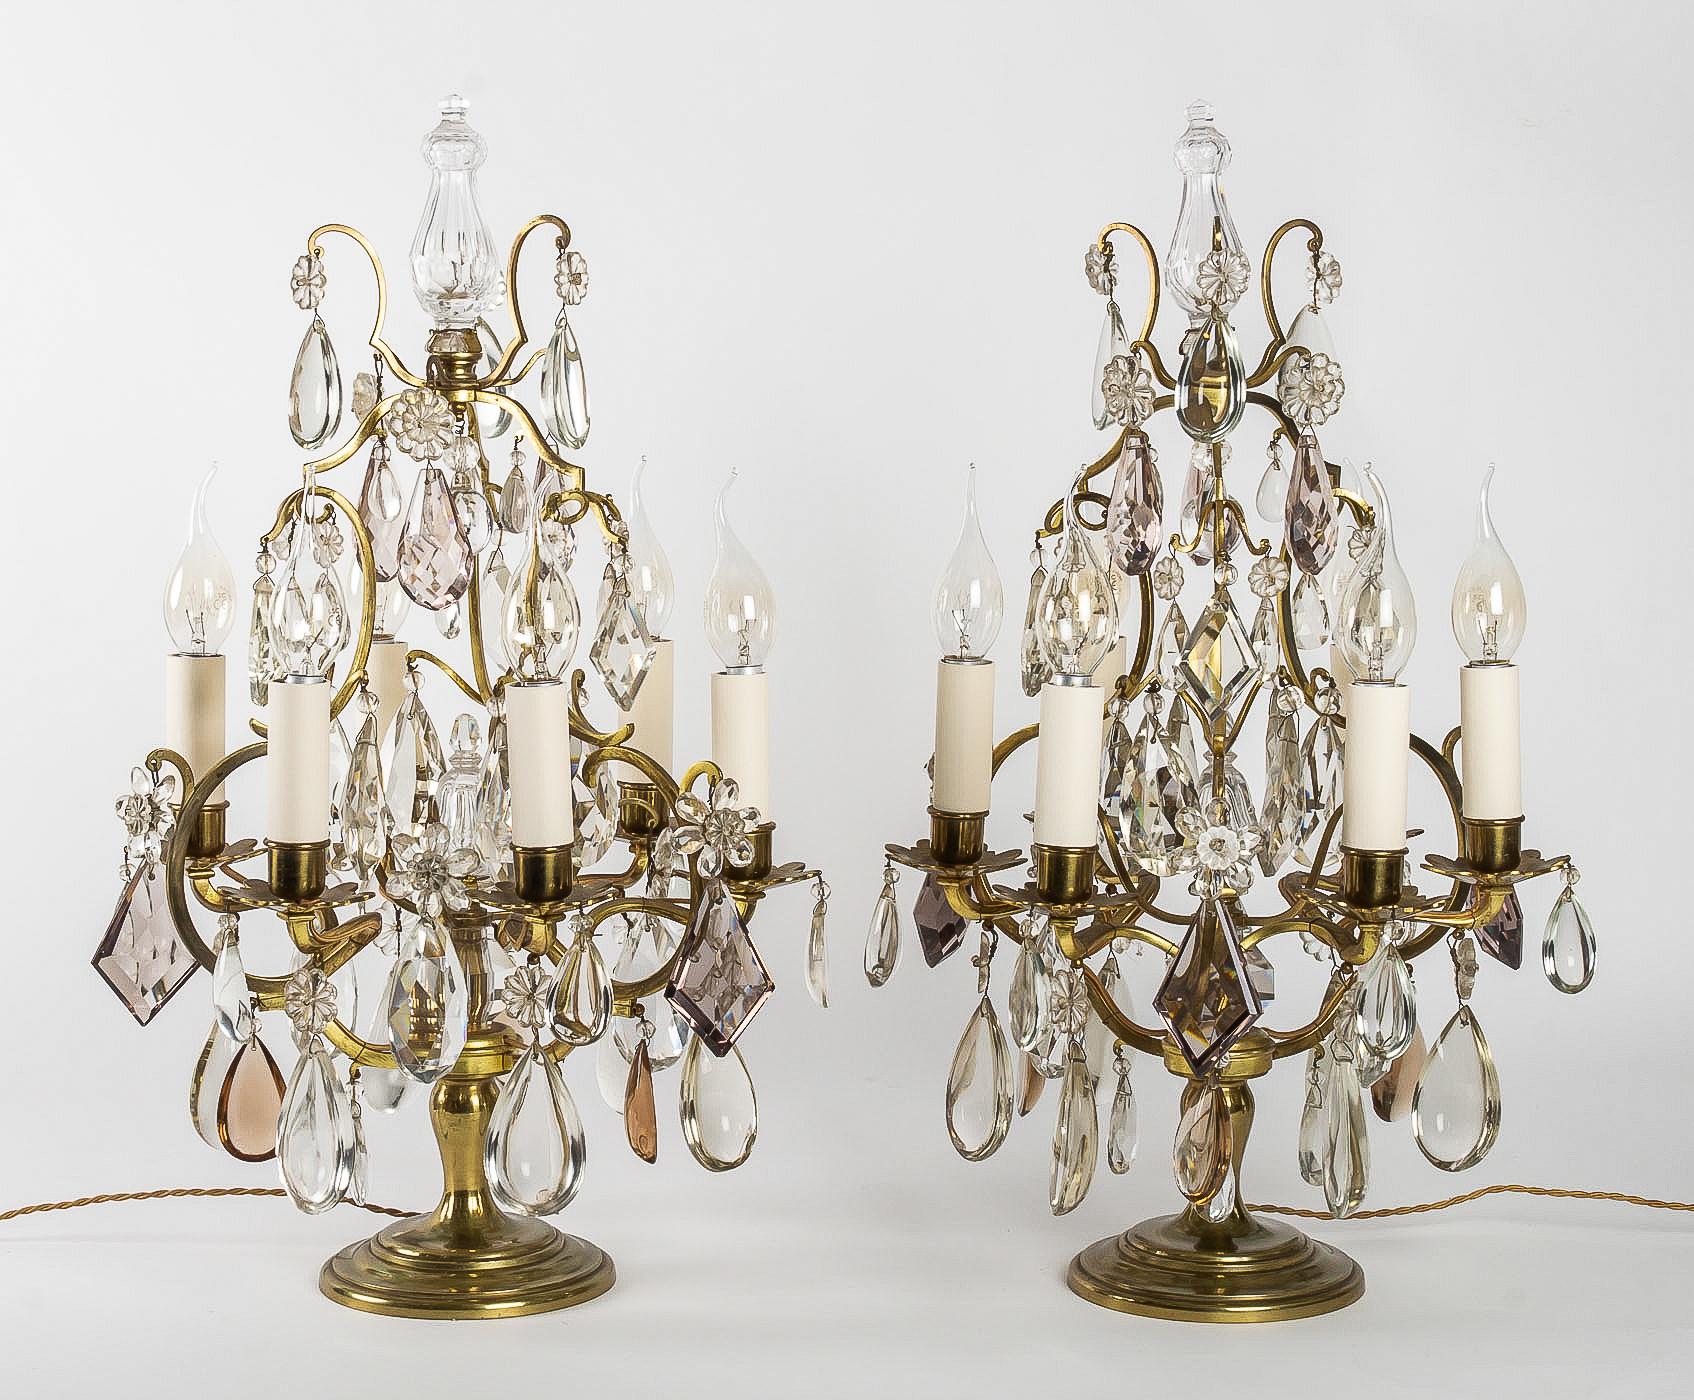 French Louis XV style, pair of gilt bronze girandole lamps, circa 1900

Elegant and decorative pair of gilt bronze girandole candelabra lamps. 
Fine quality cut crystal decoration attributed to The Cristalleries de Baccarat with white and